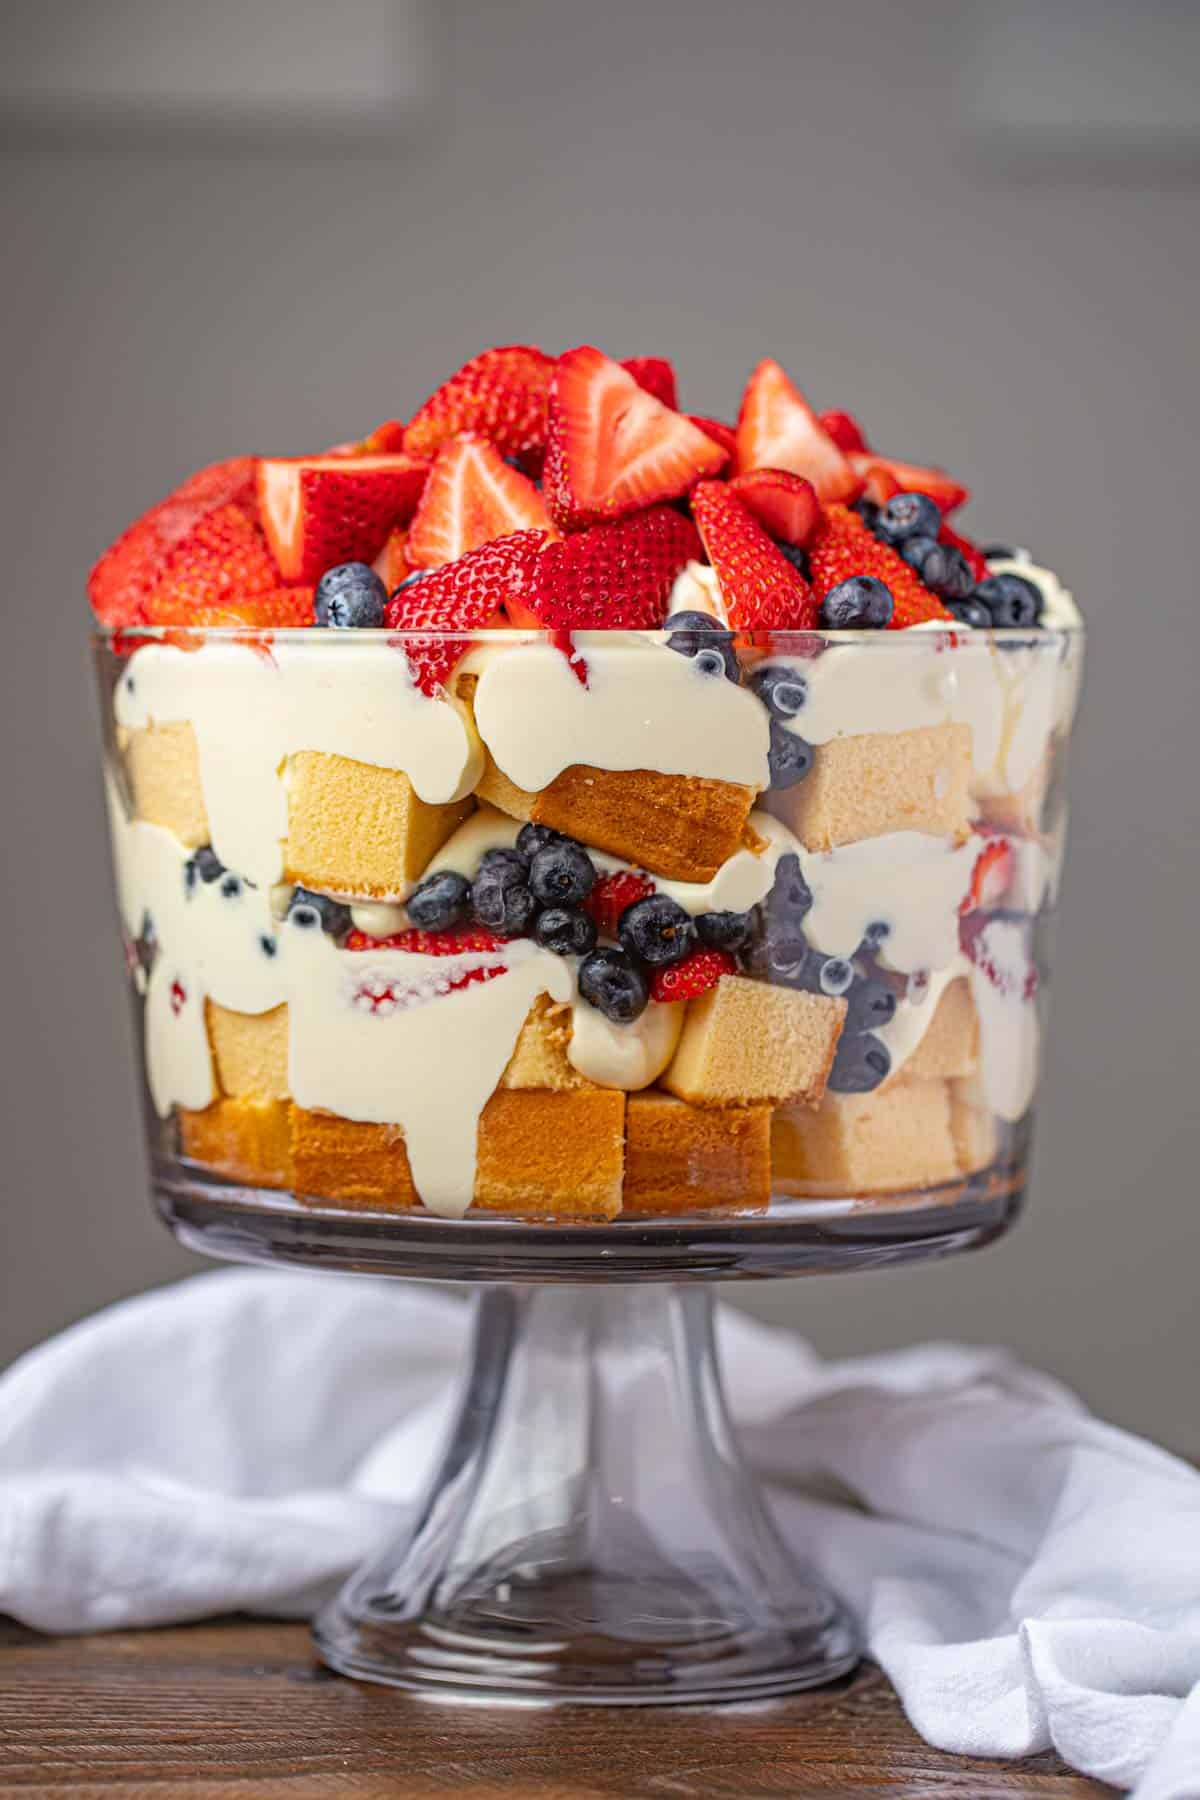 Classic Trifle with strawberries and blueberries in large trifle dish